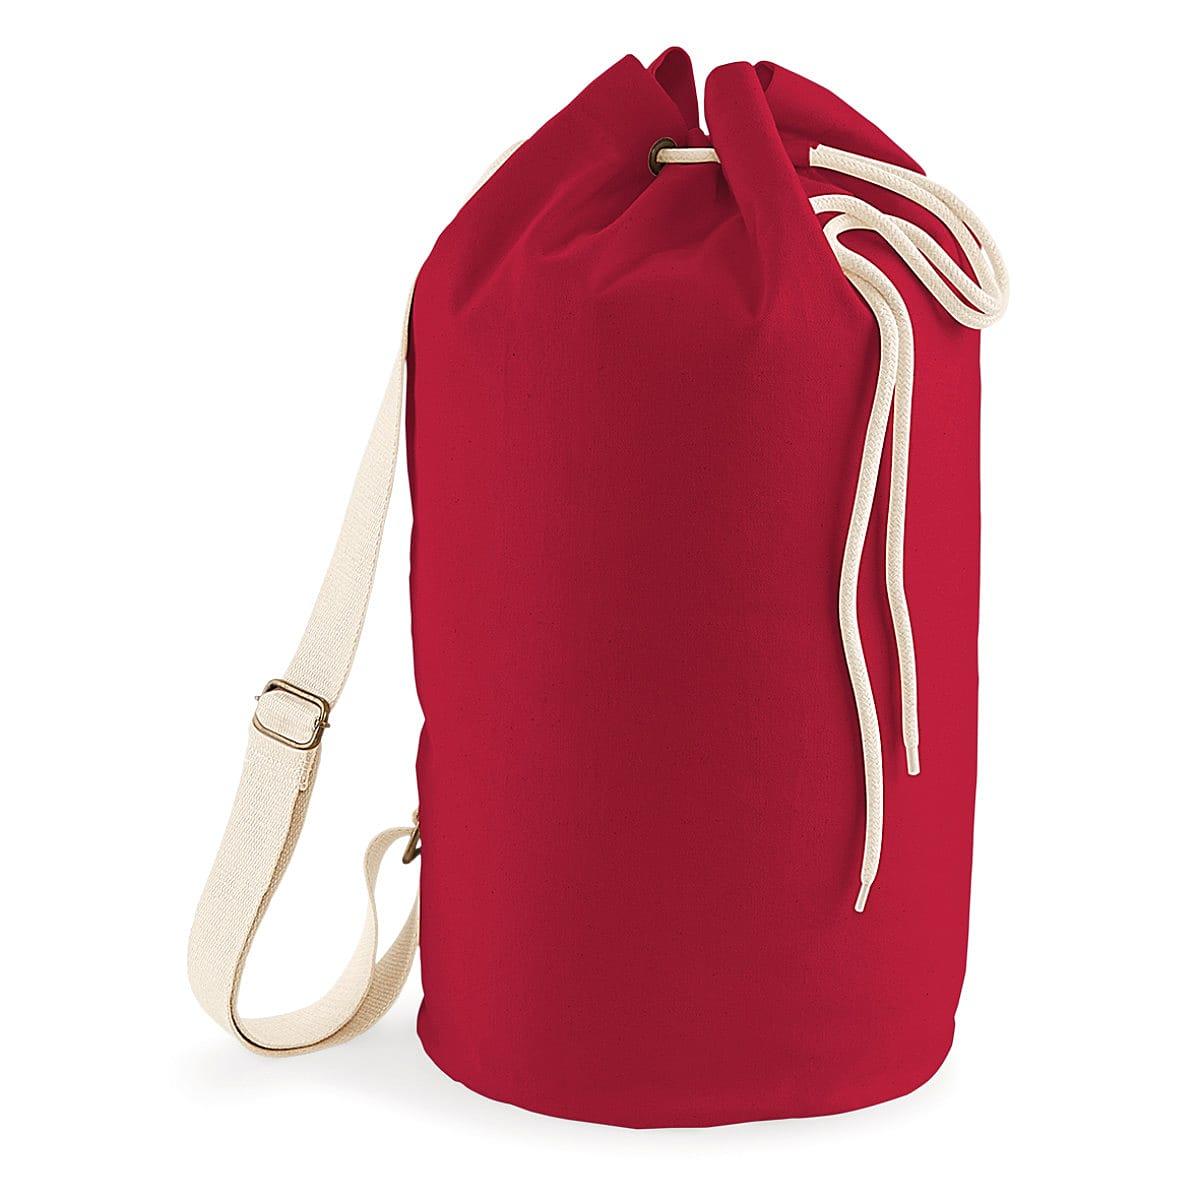 Westford Mill Organic Sea Bag in Classic Red (Product Code: W812)